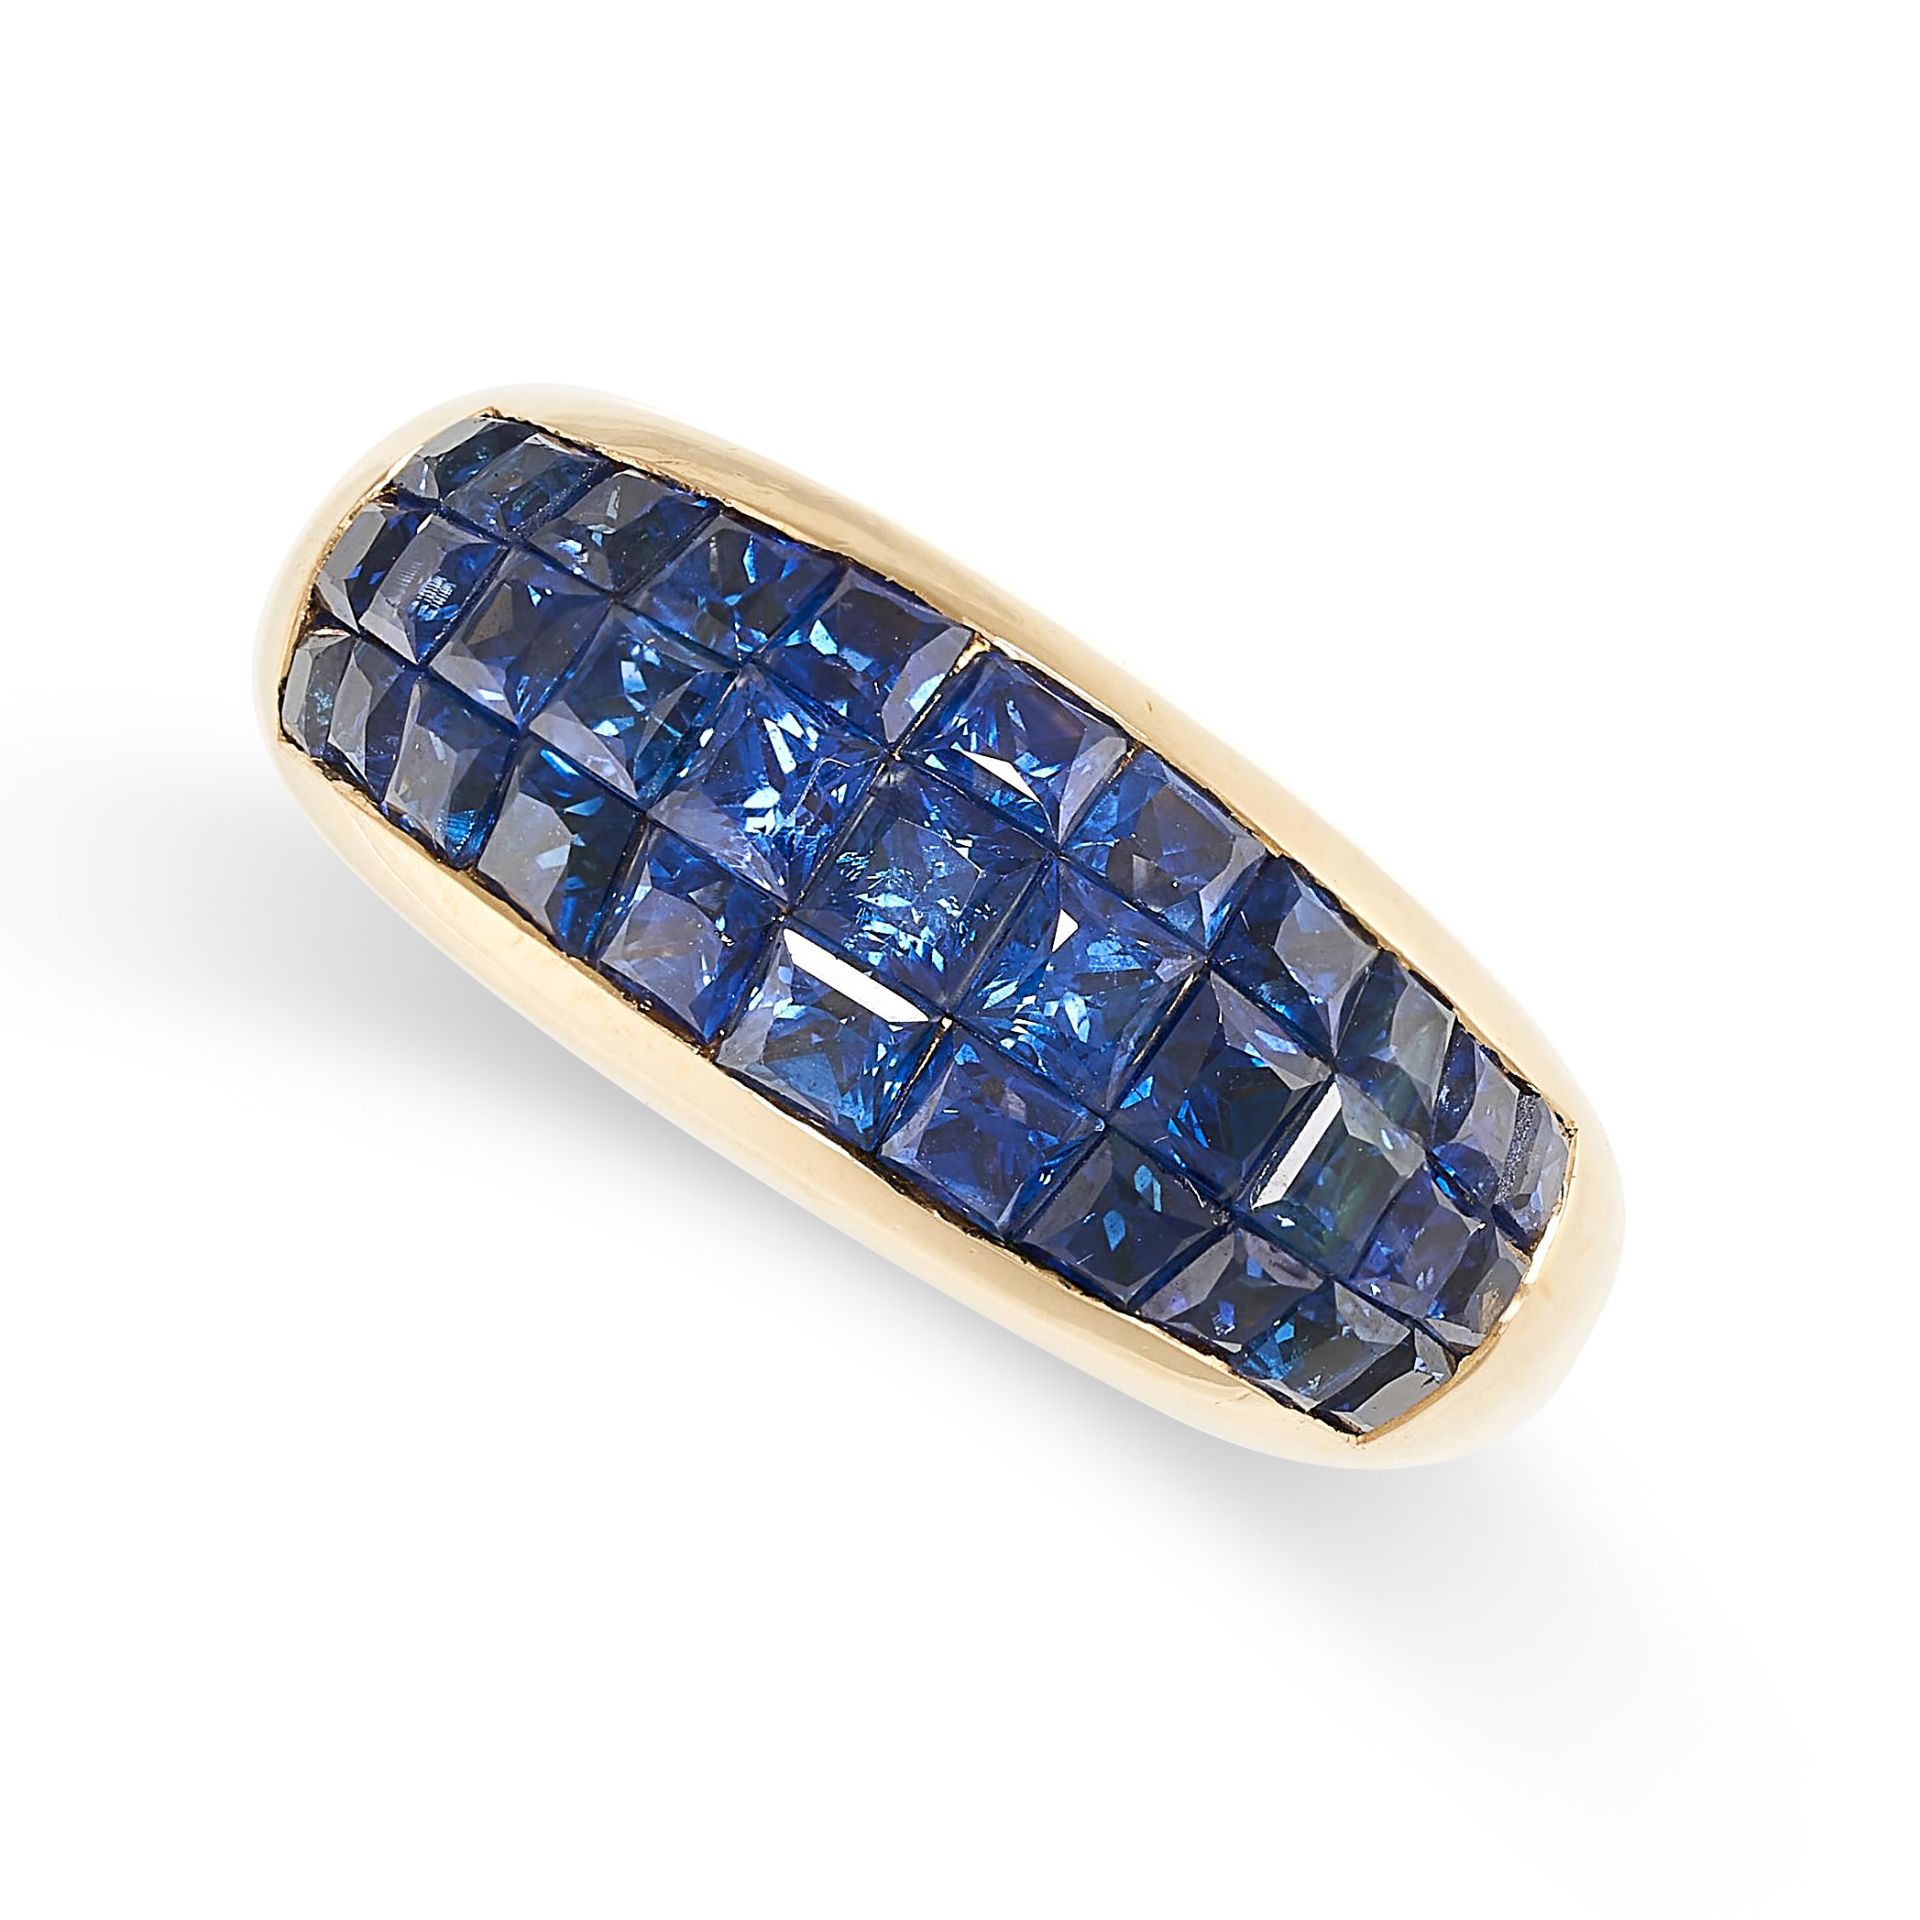 A SAPPHIRE BOMBE RING in 18ct yellow gold, set with three rows of step cut mystery set blue